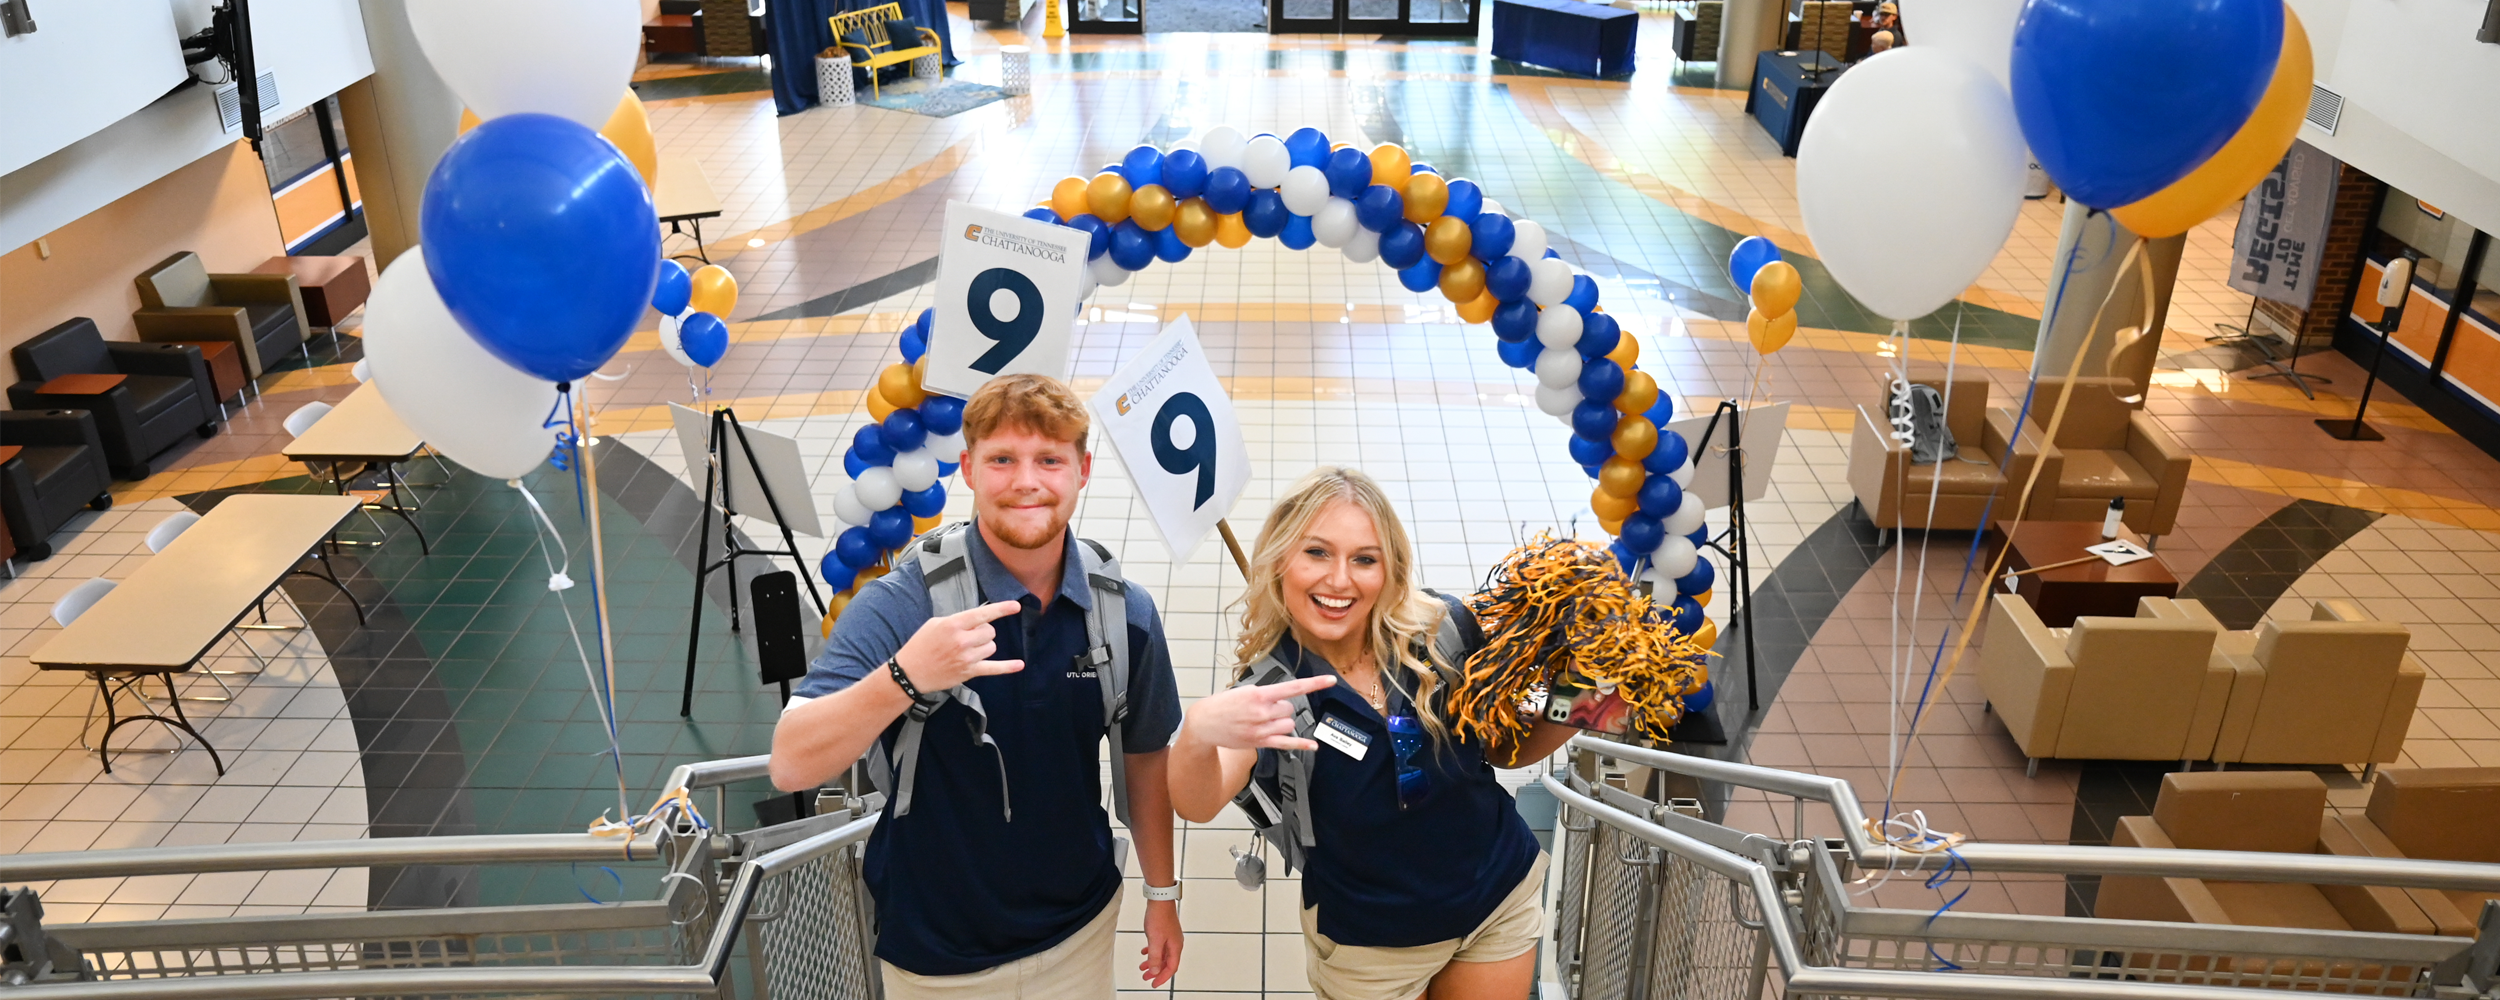 Two orientation leaders standing in front of a balloon arch